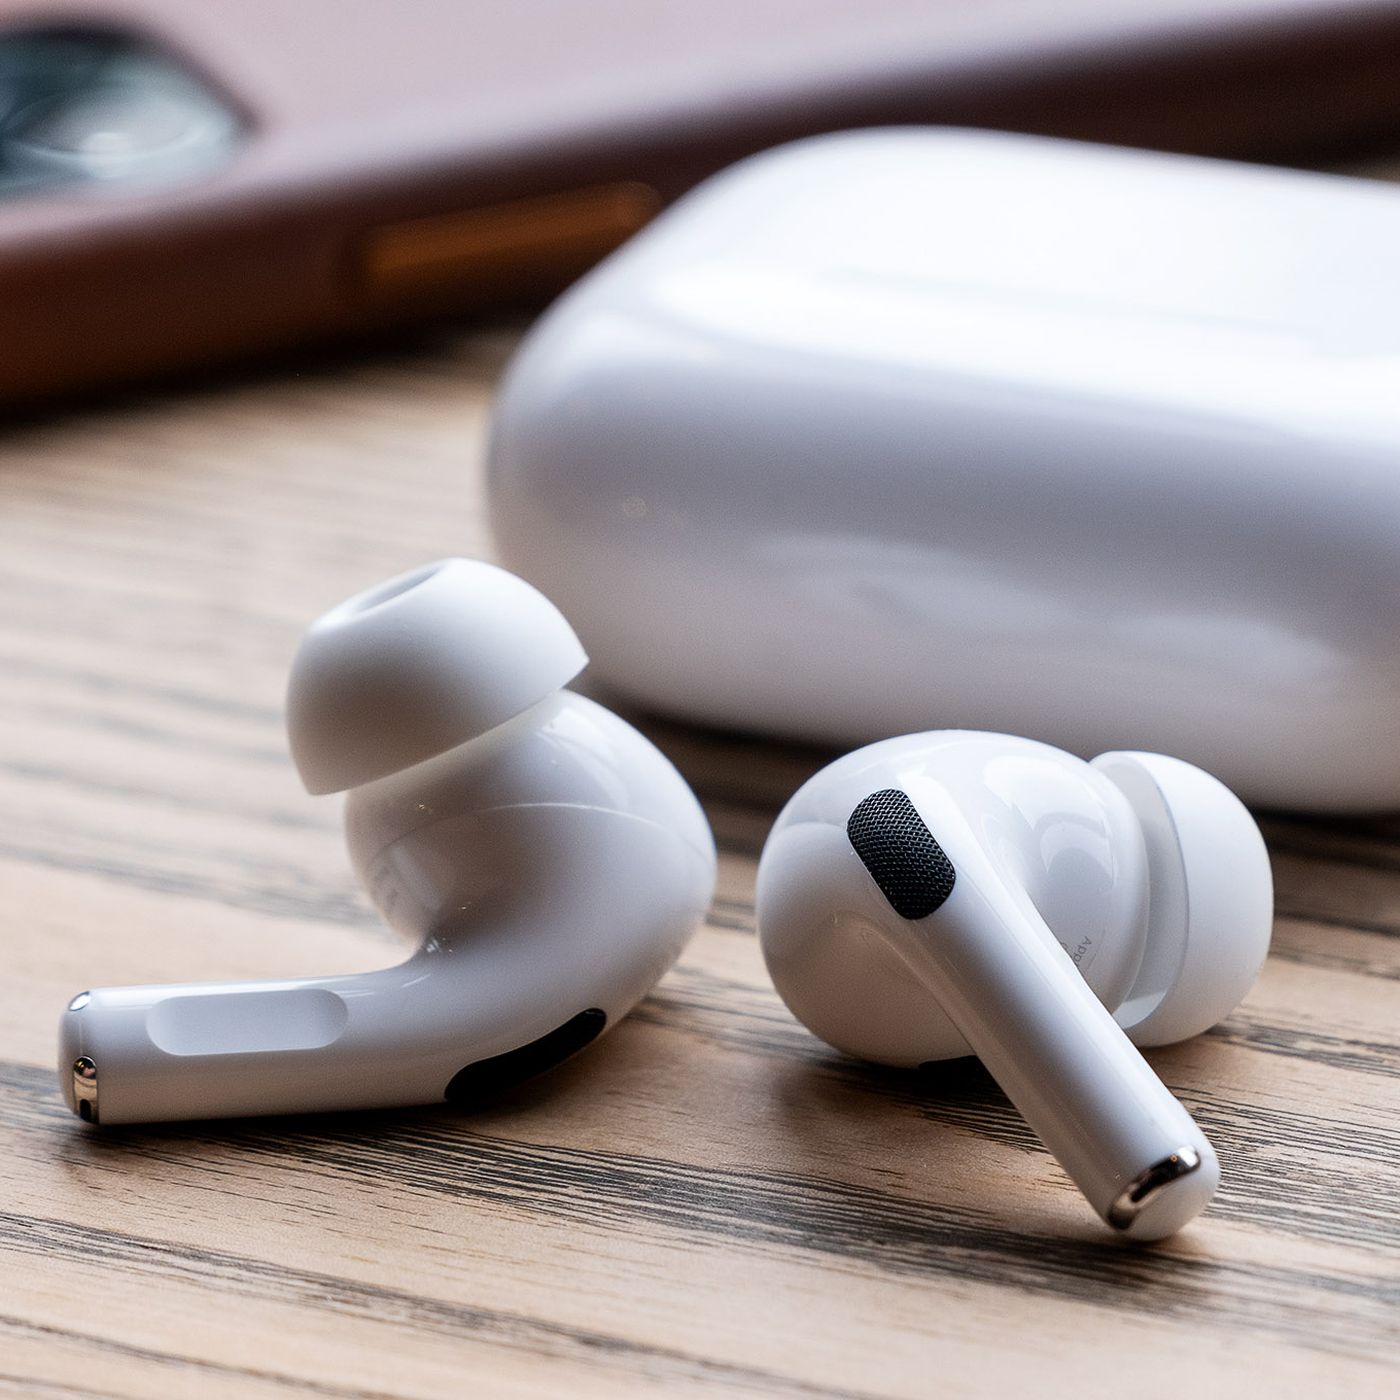 If your AirPods sound muffled or unclear, follow the steps below to clean your AirPods and improve the sound quality.